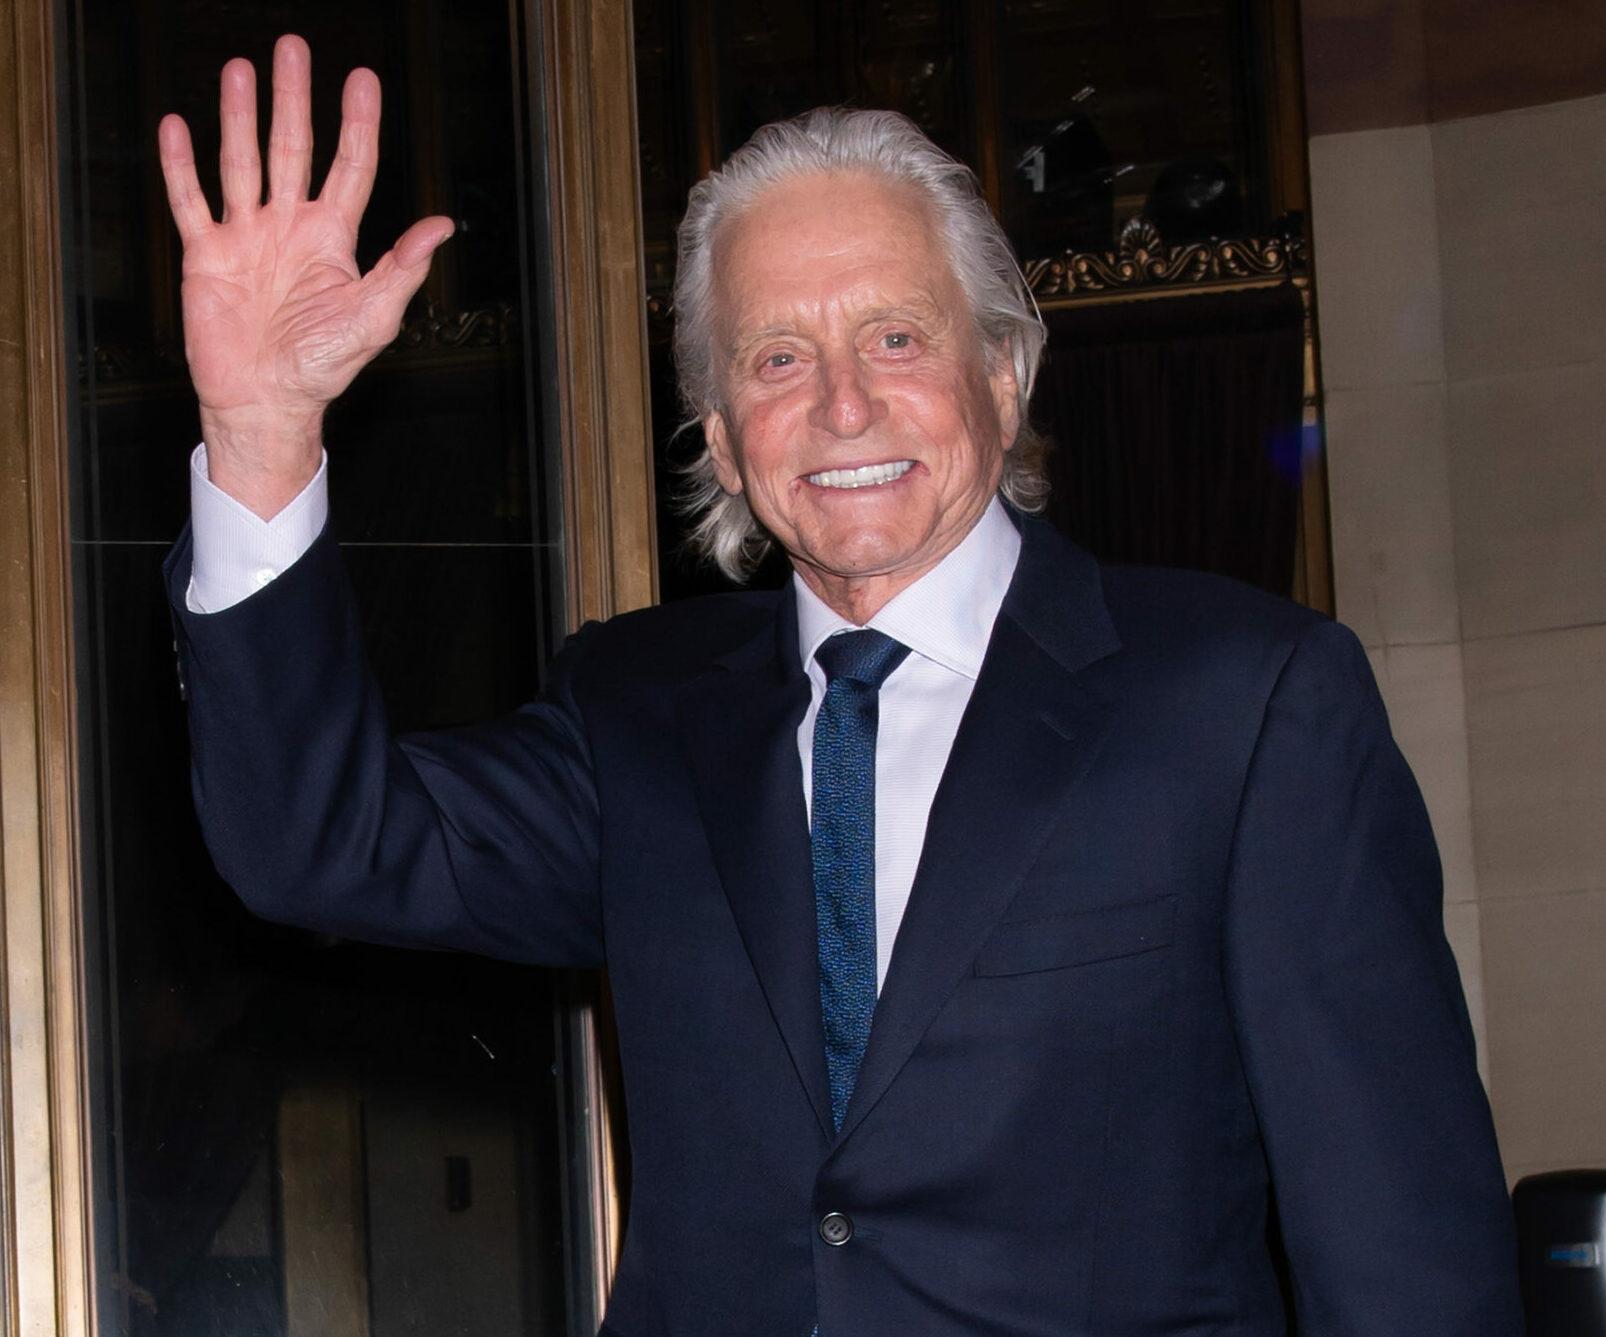 Michael Douglas Arrives to Monte Cristo Awards in NYC